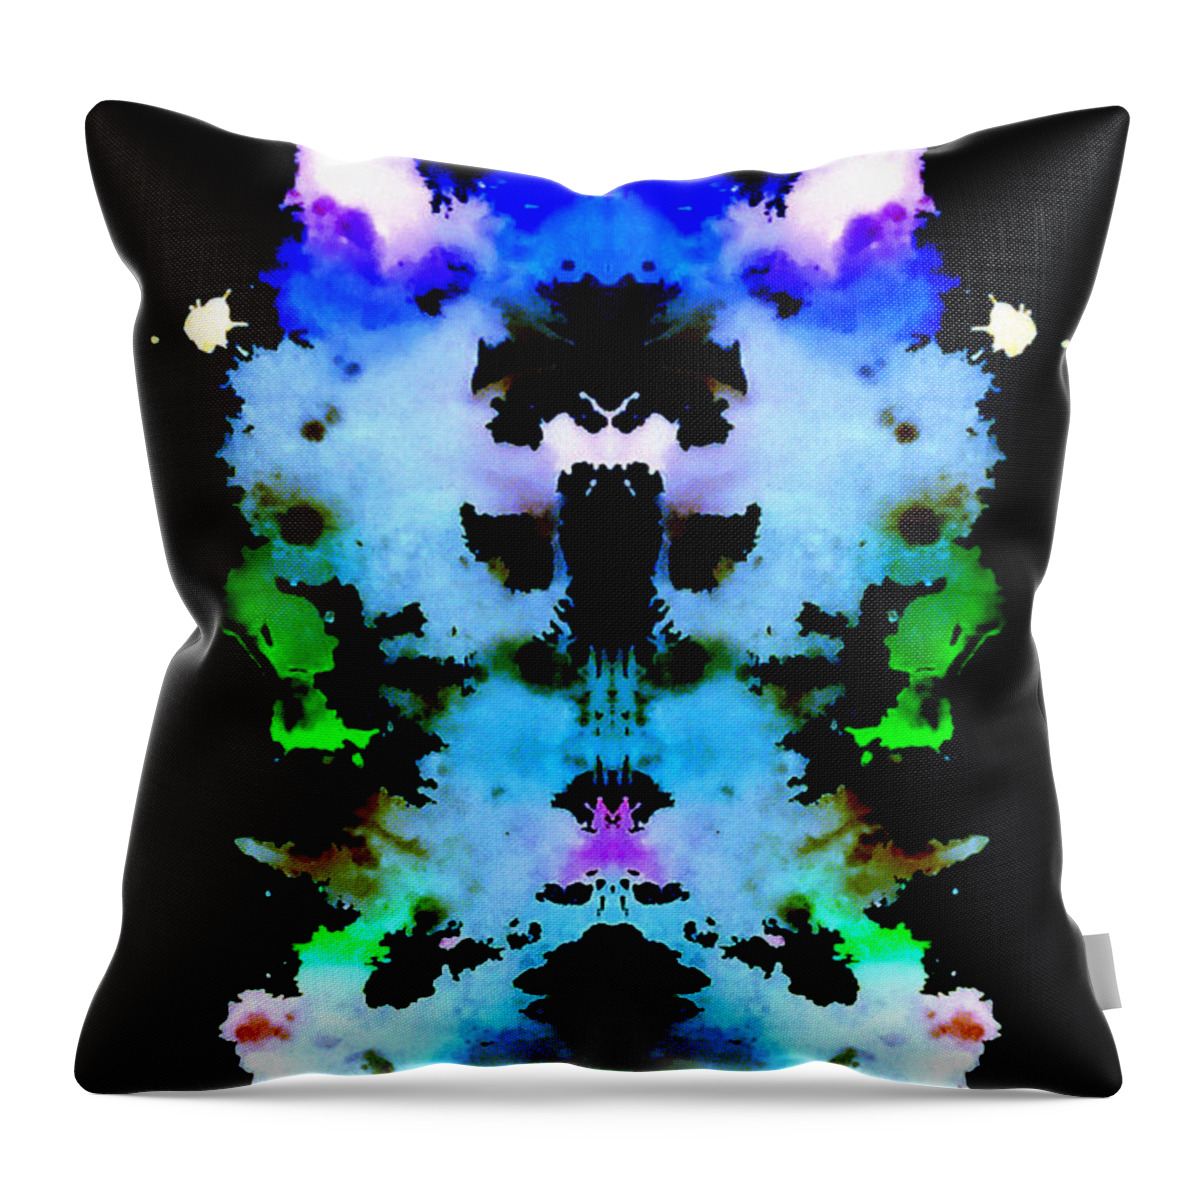 Abstract Throw Pillow featuring the painting Bubblegum Glory by Stephenie Zagorski